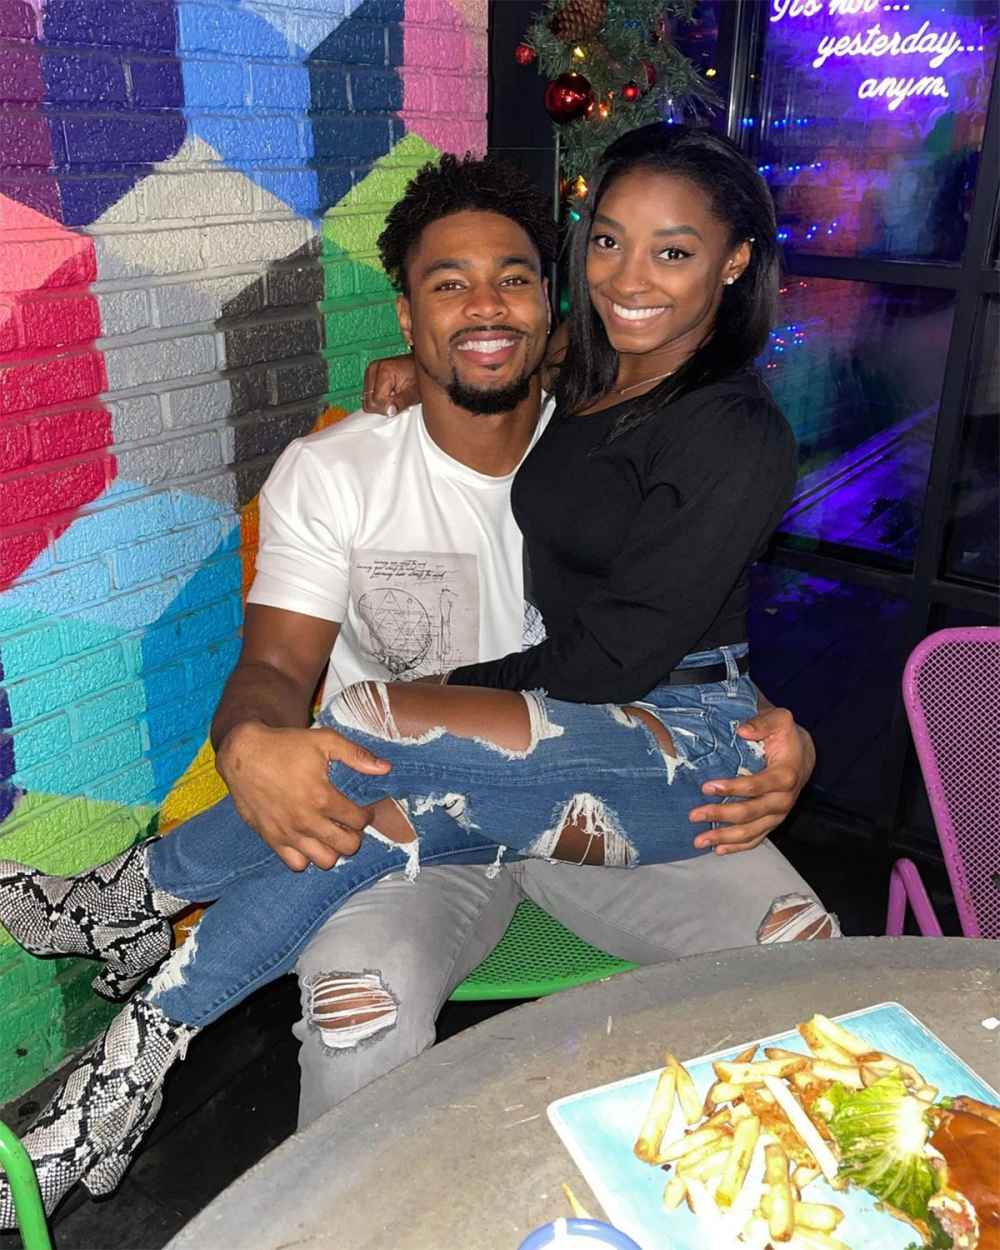 Simone Biles Boyfriend Jonathan Owens Shows His Support After Tokyo Olympics Exit 2